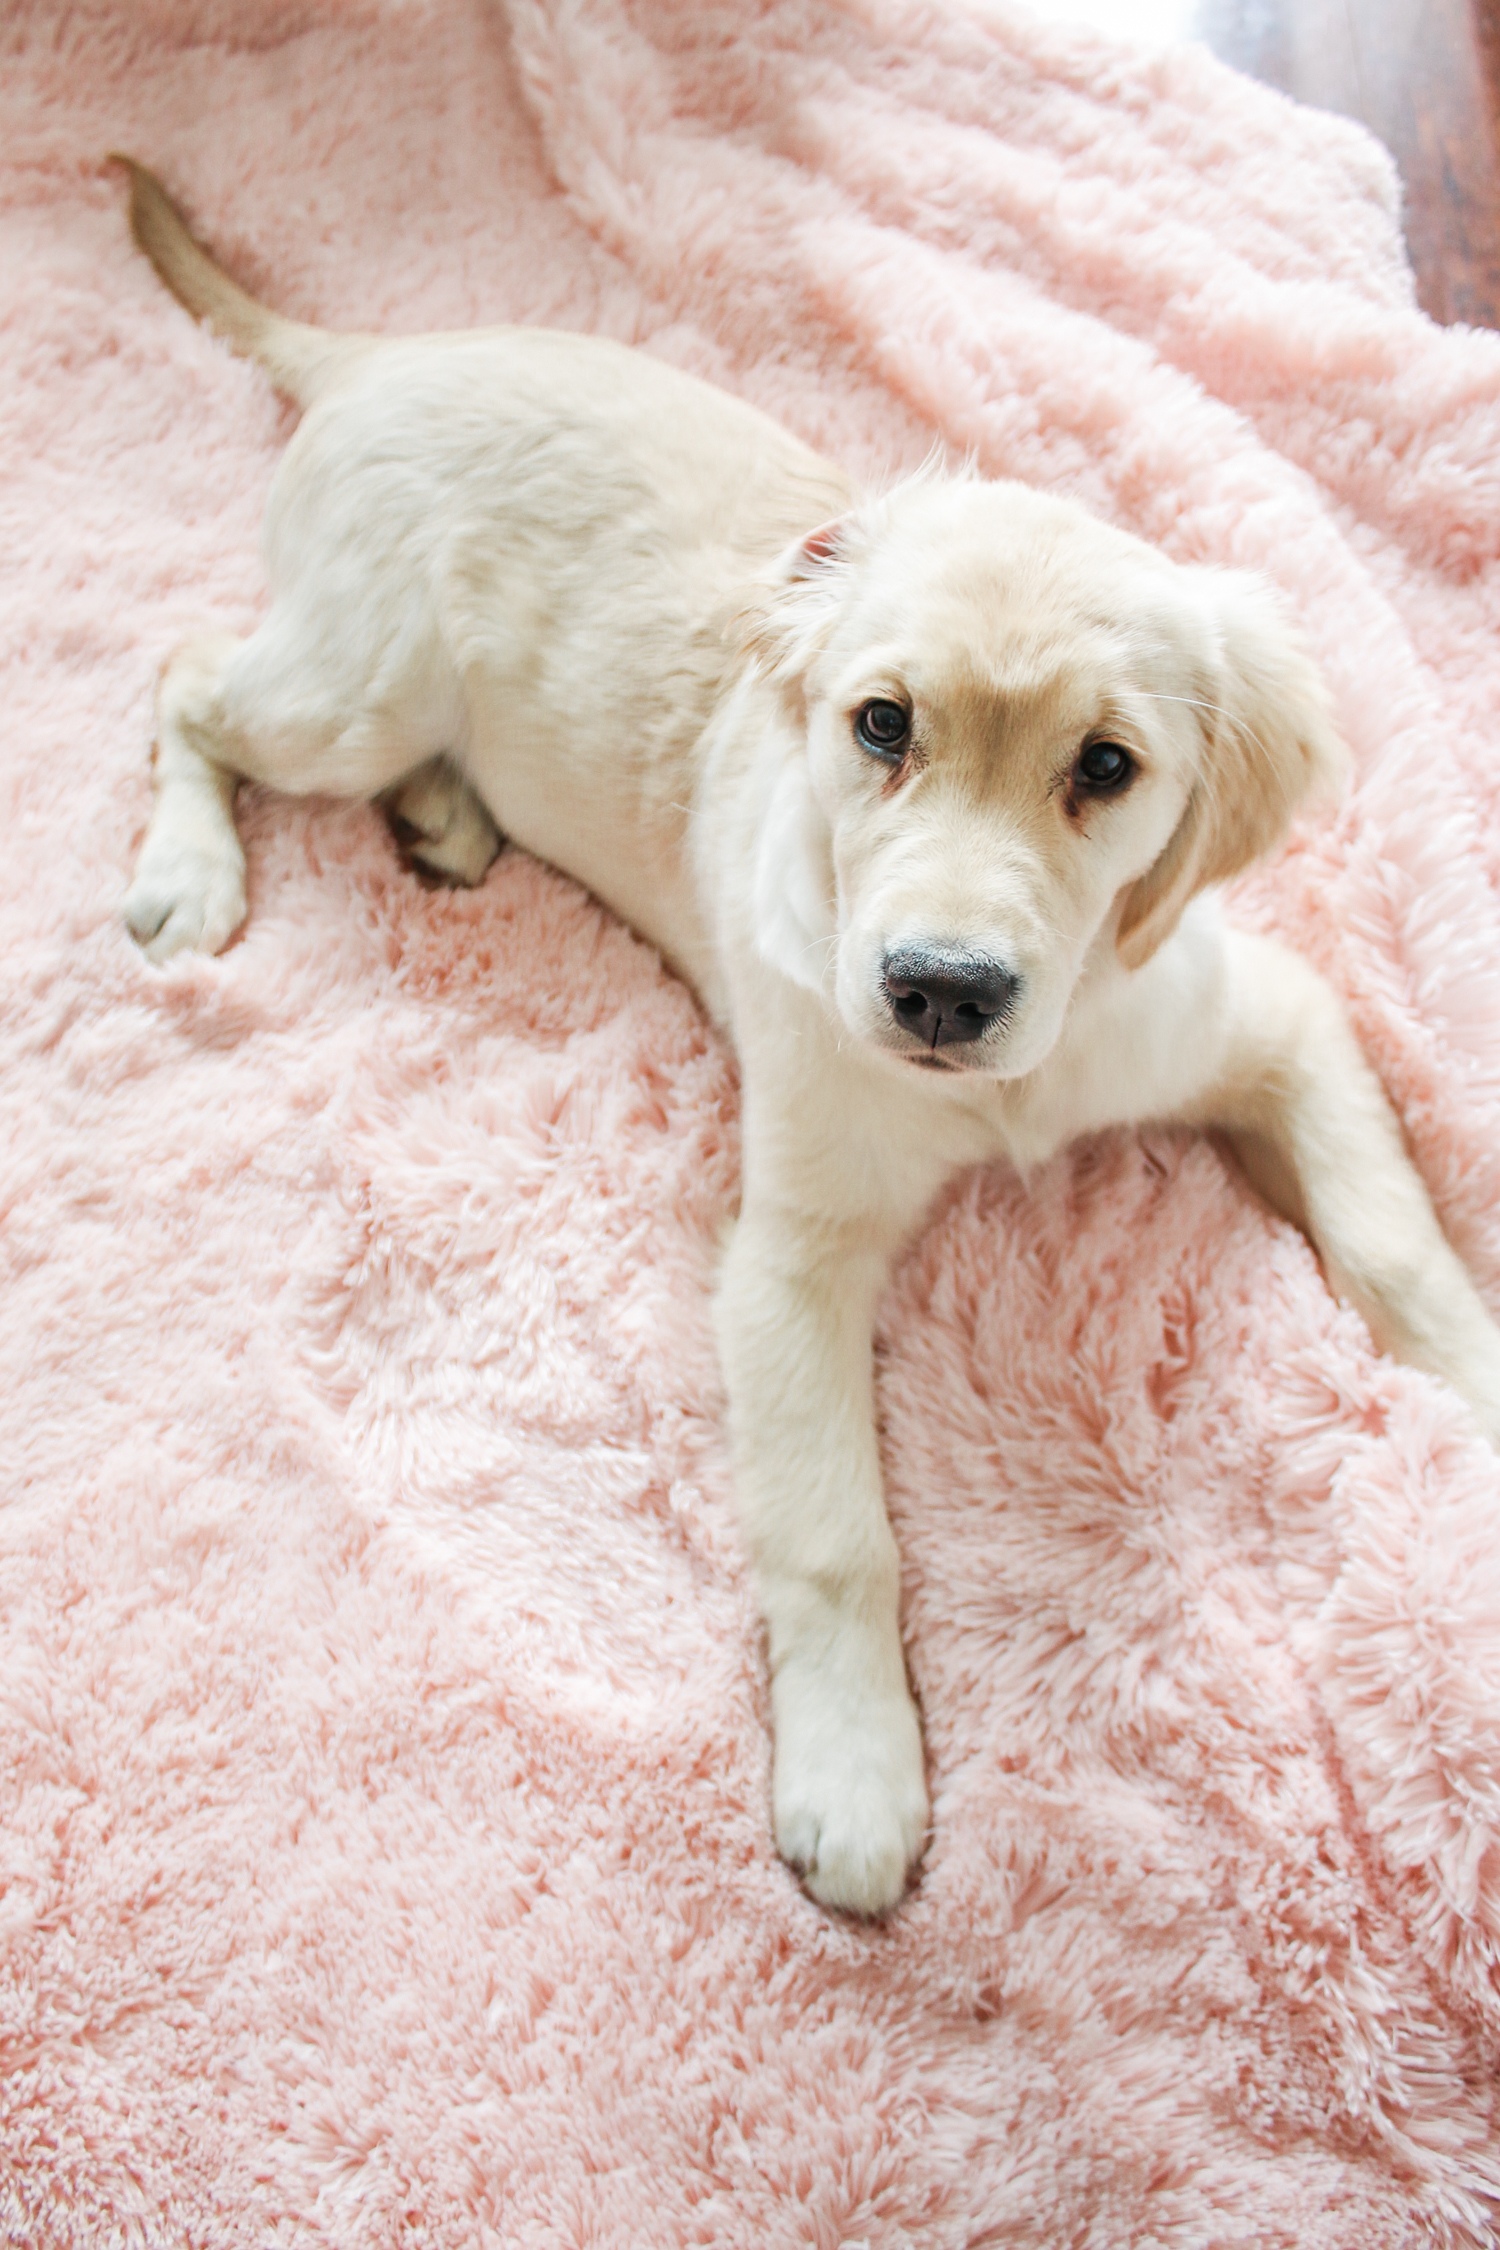 Woman's Best Friend: 8 Reasons to Get a Puppy by southern lifestyle blogger Stephanie Ziajka from Diary of a Debutante, how a new golden retriever puppy can help if you're depressed in a new city, 8 reasons to get a puppy, 8 reasons why you should get a dog, 4 month old golden retriever puppy pictures